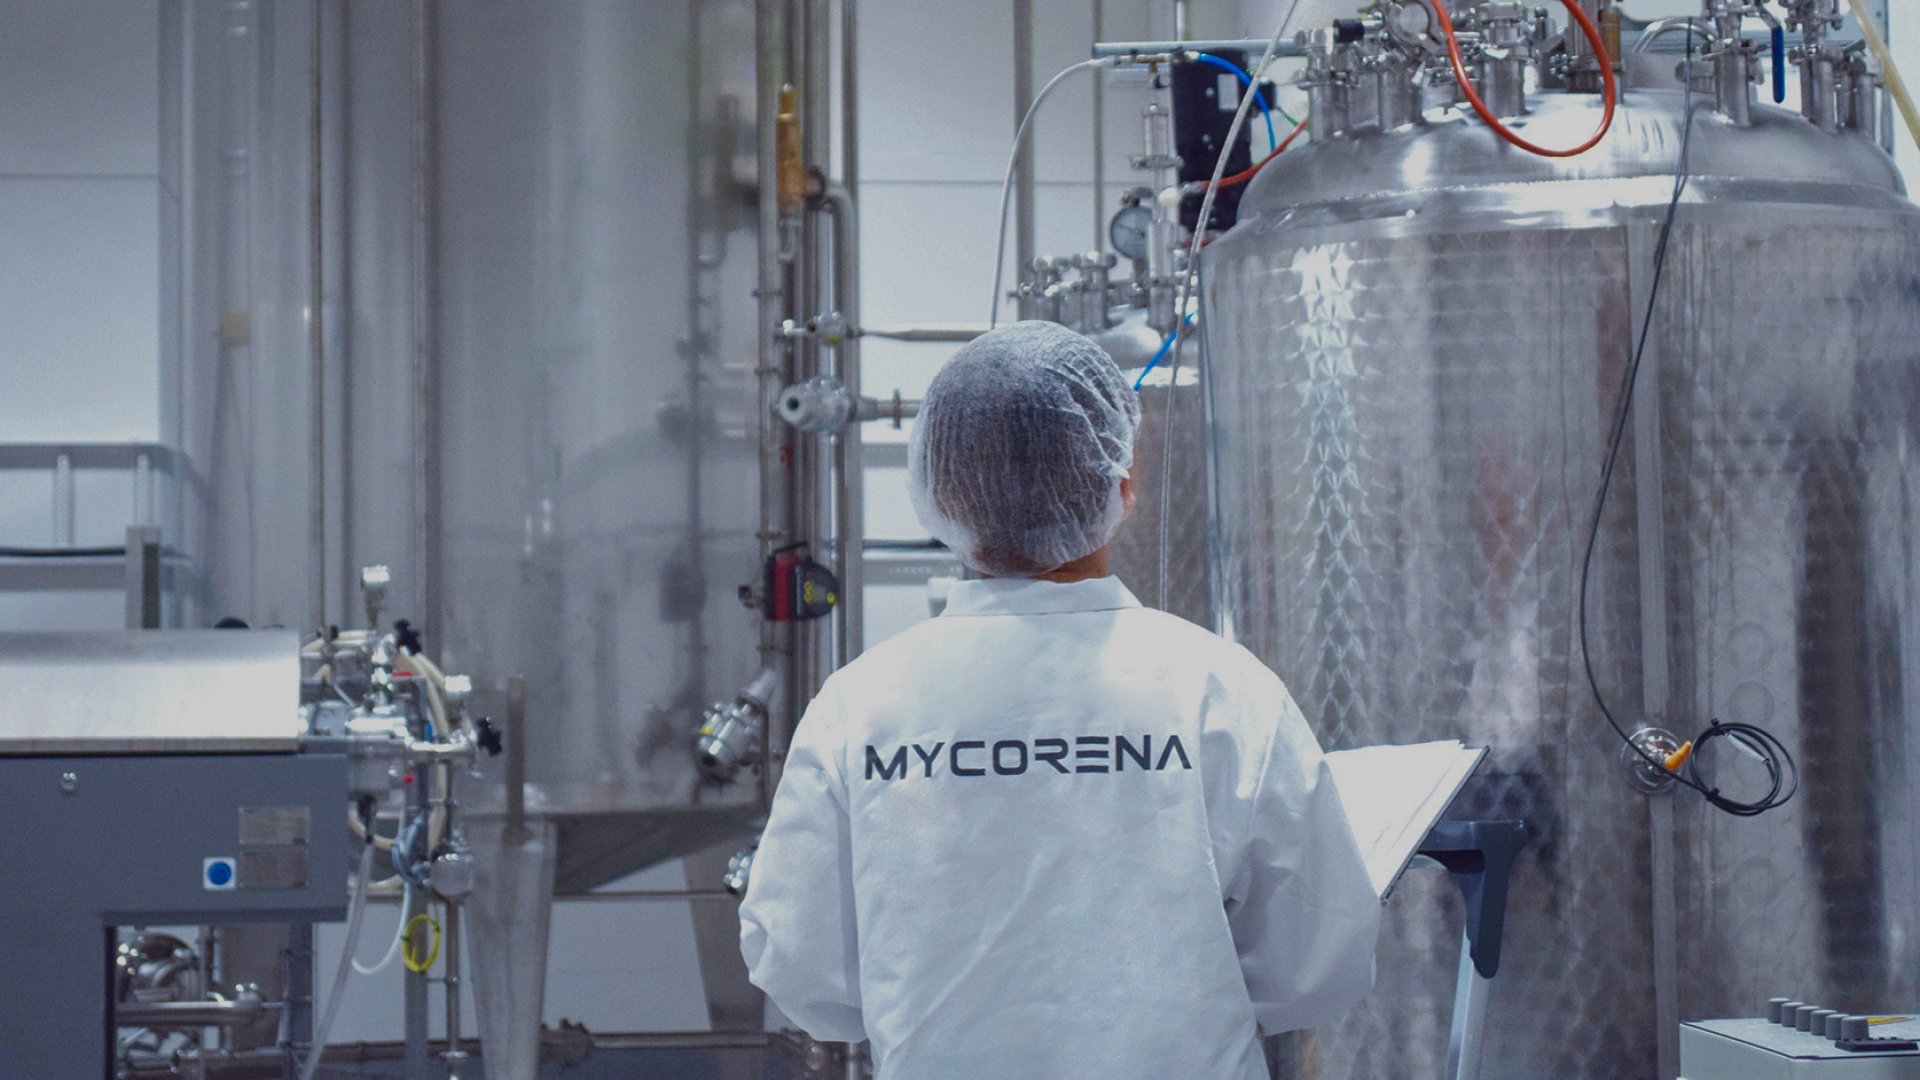 Mycorena raises landmark €24M Series A for commercialization of mycoprotein